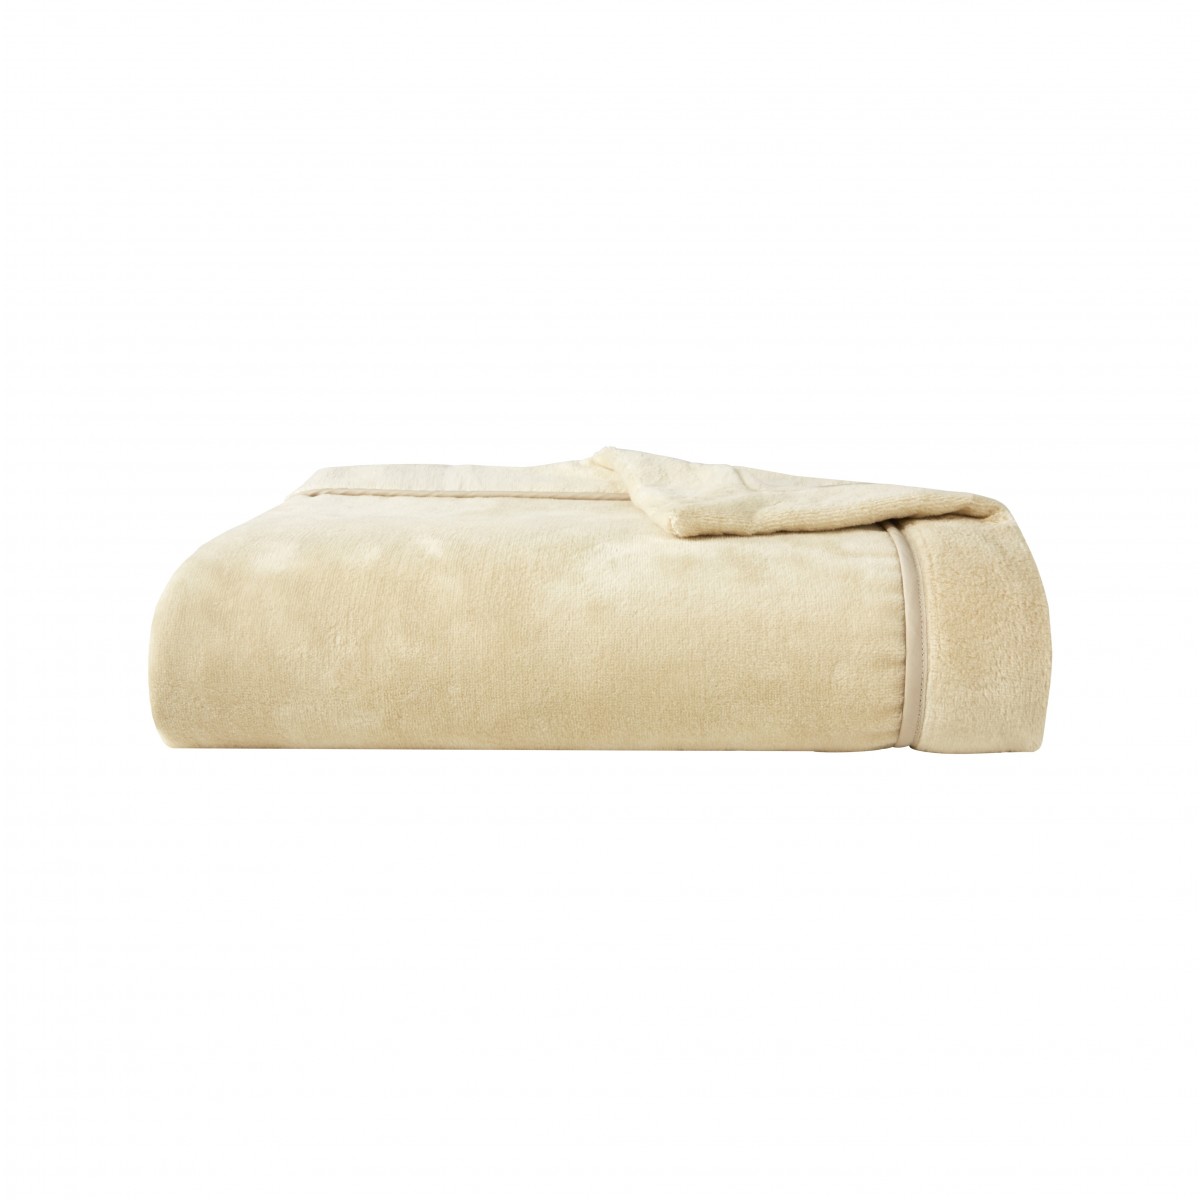 Yves Delorme Cotton Blanket 綿毛布 - Yves Delorme Luxury